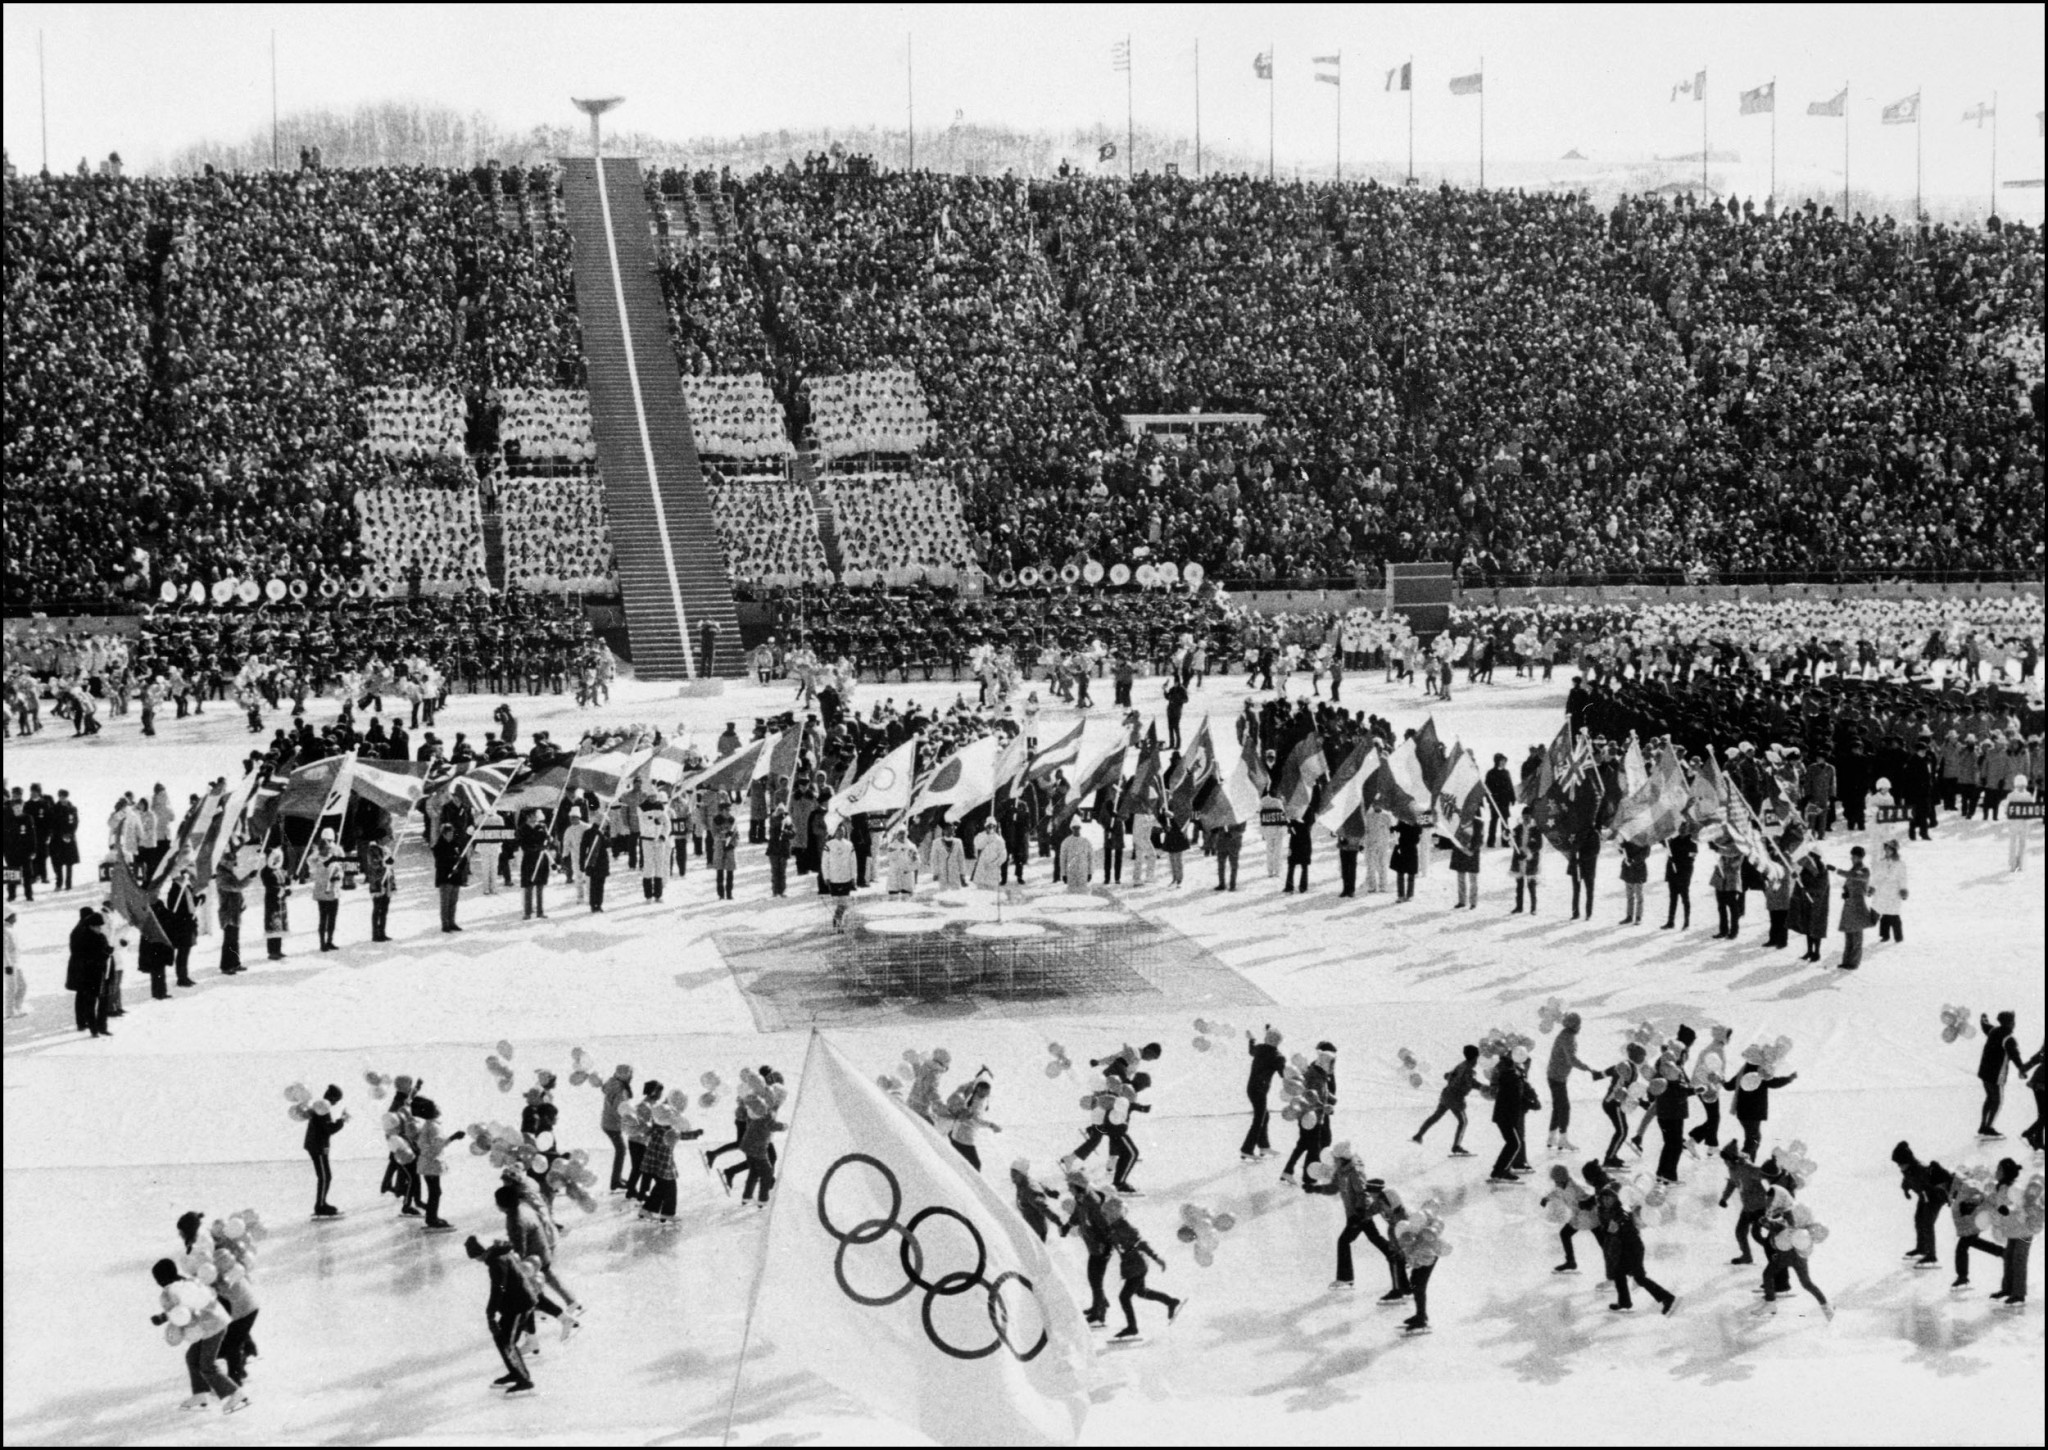 Sapporo hoping bid for 2030 Winter Olympics will be boosted by legacy of 1972